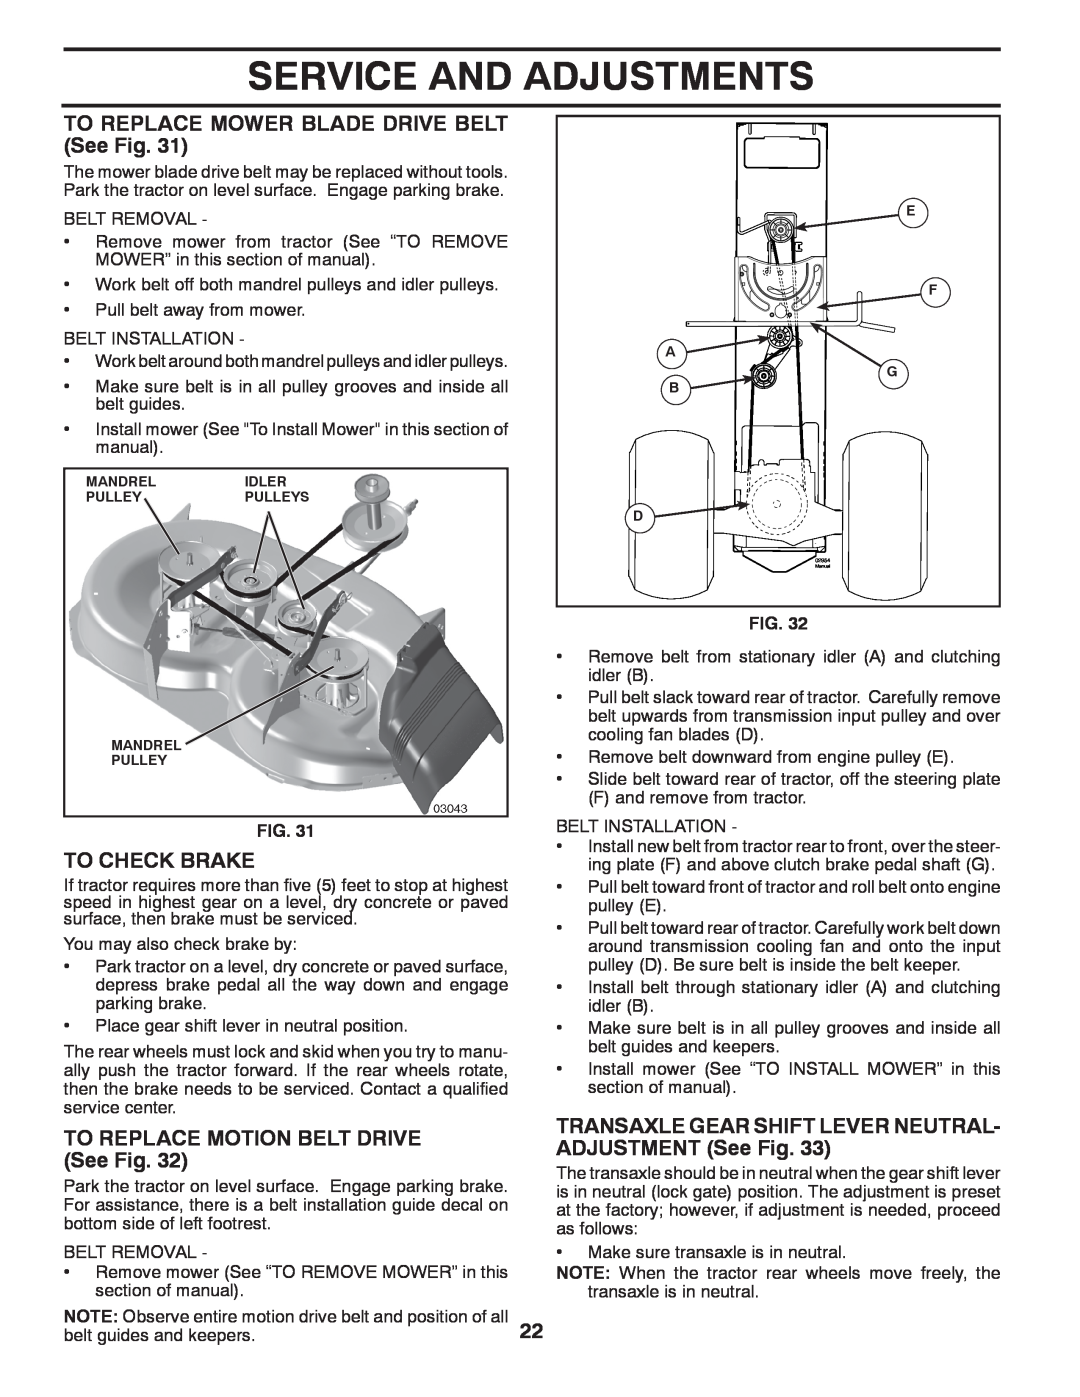 Poulan 96042003505 manual Service And Adjustments, TO REPLACE MOWER BLADE DRIVE BELT See Fig, To Check Brake 